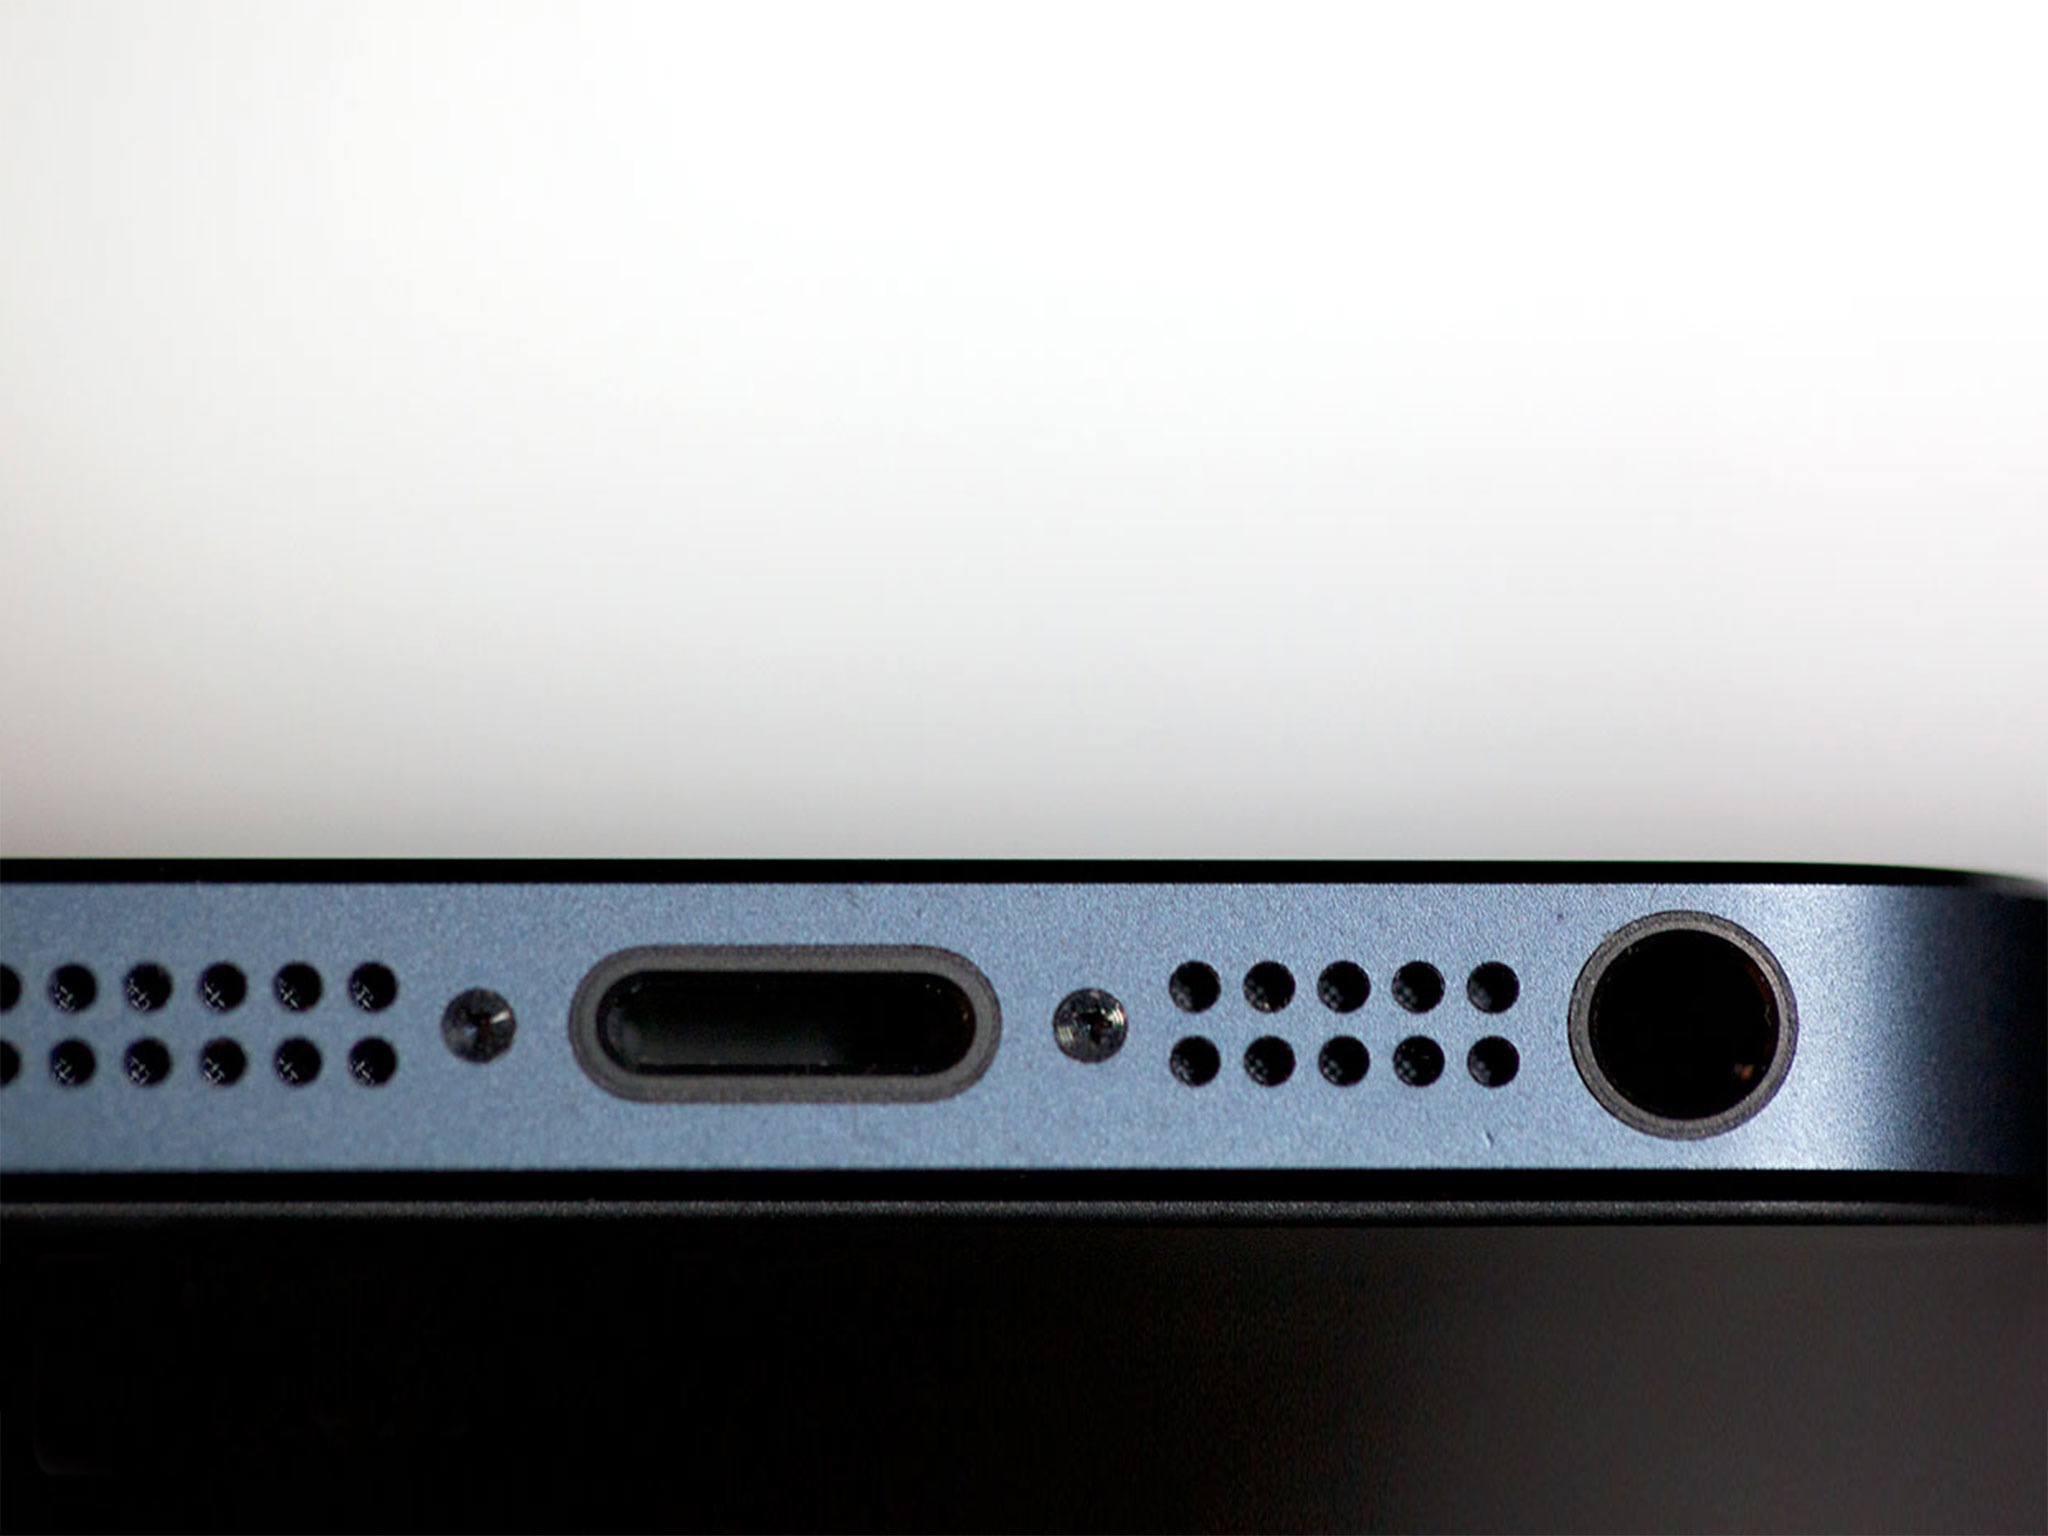 How to fix a blown loud speaker in an iPhone 5